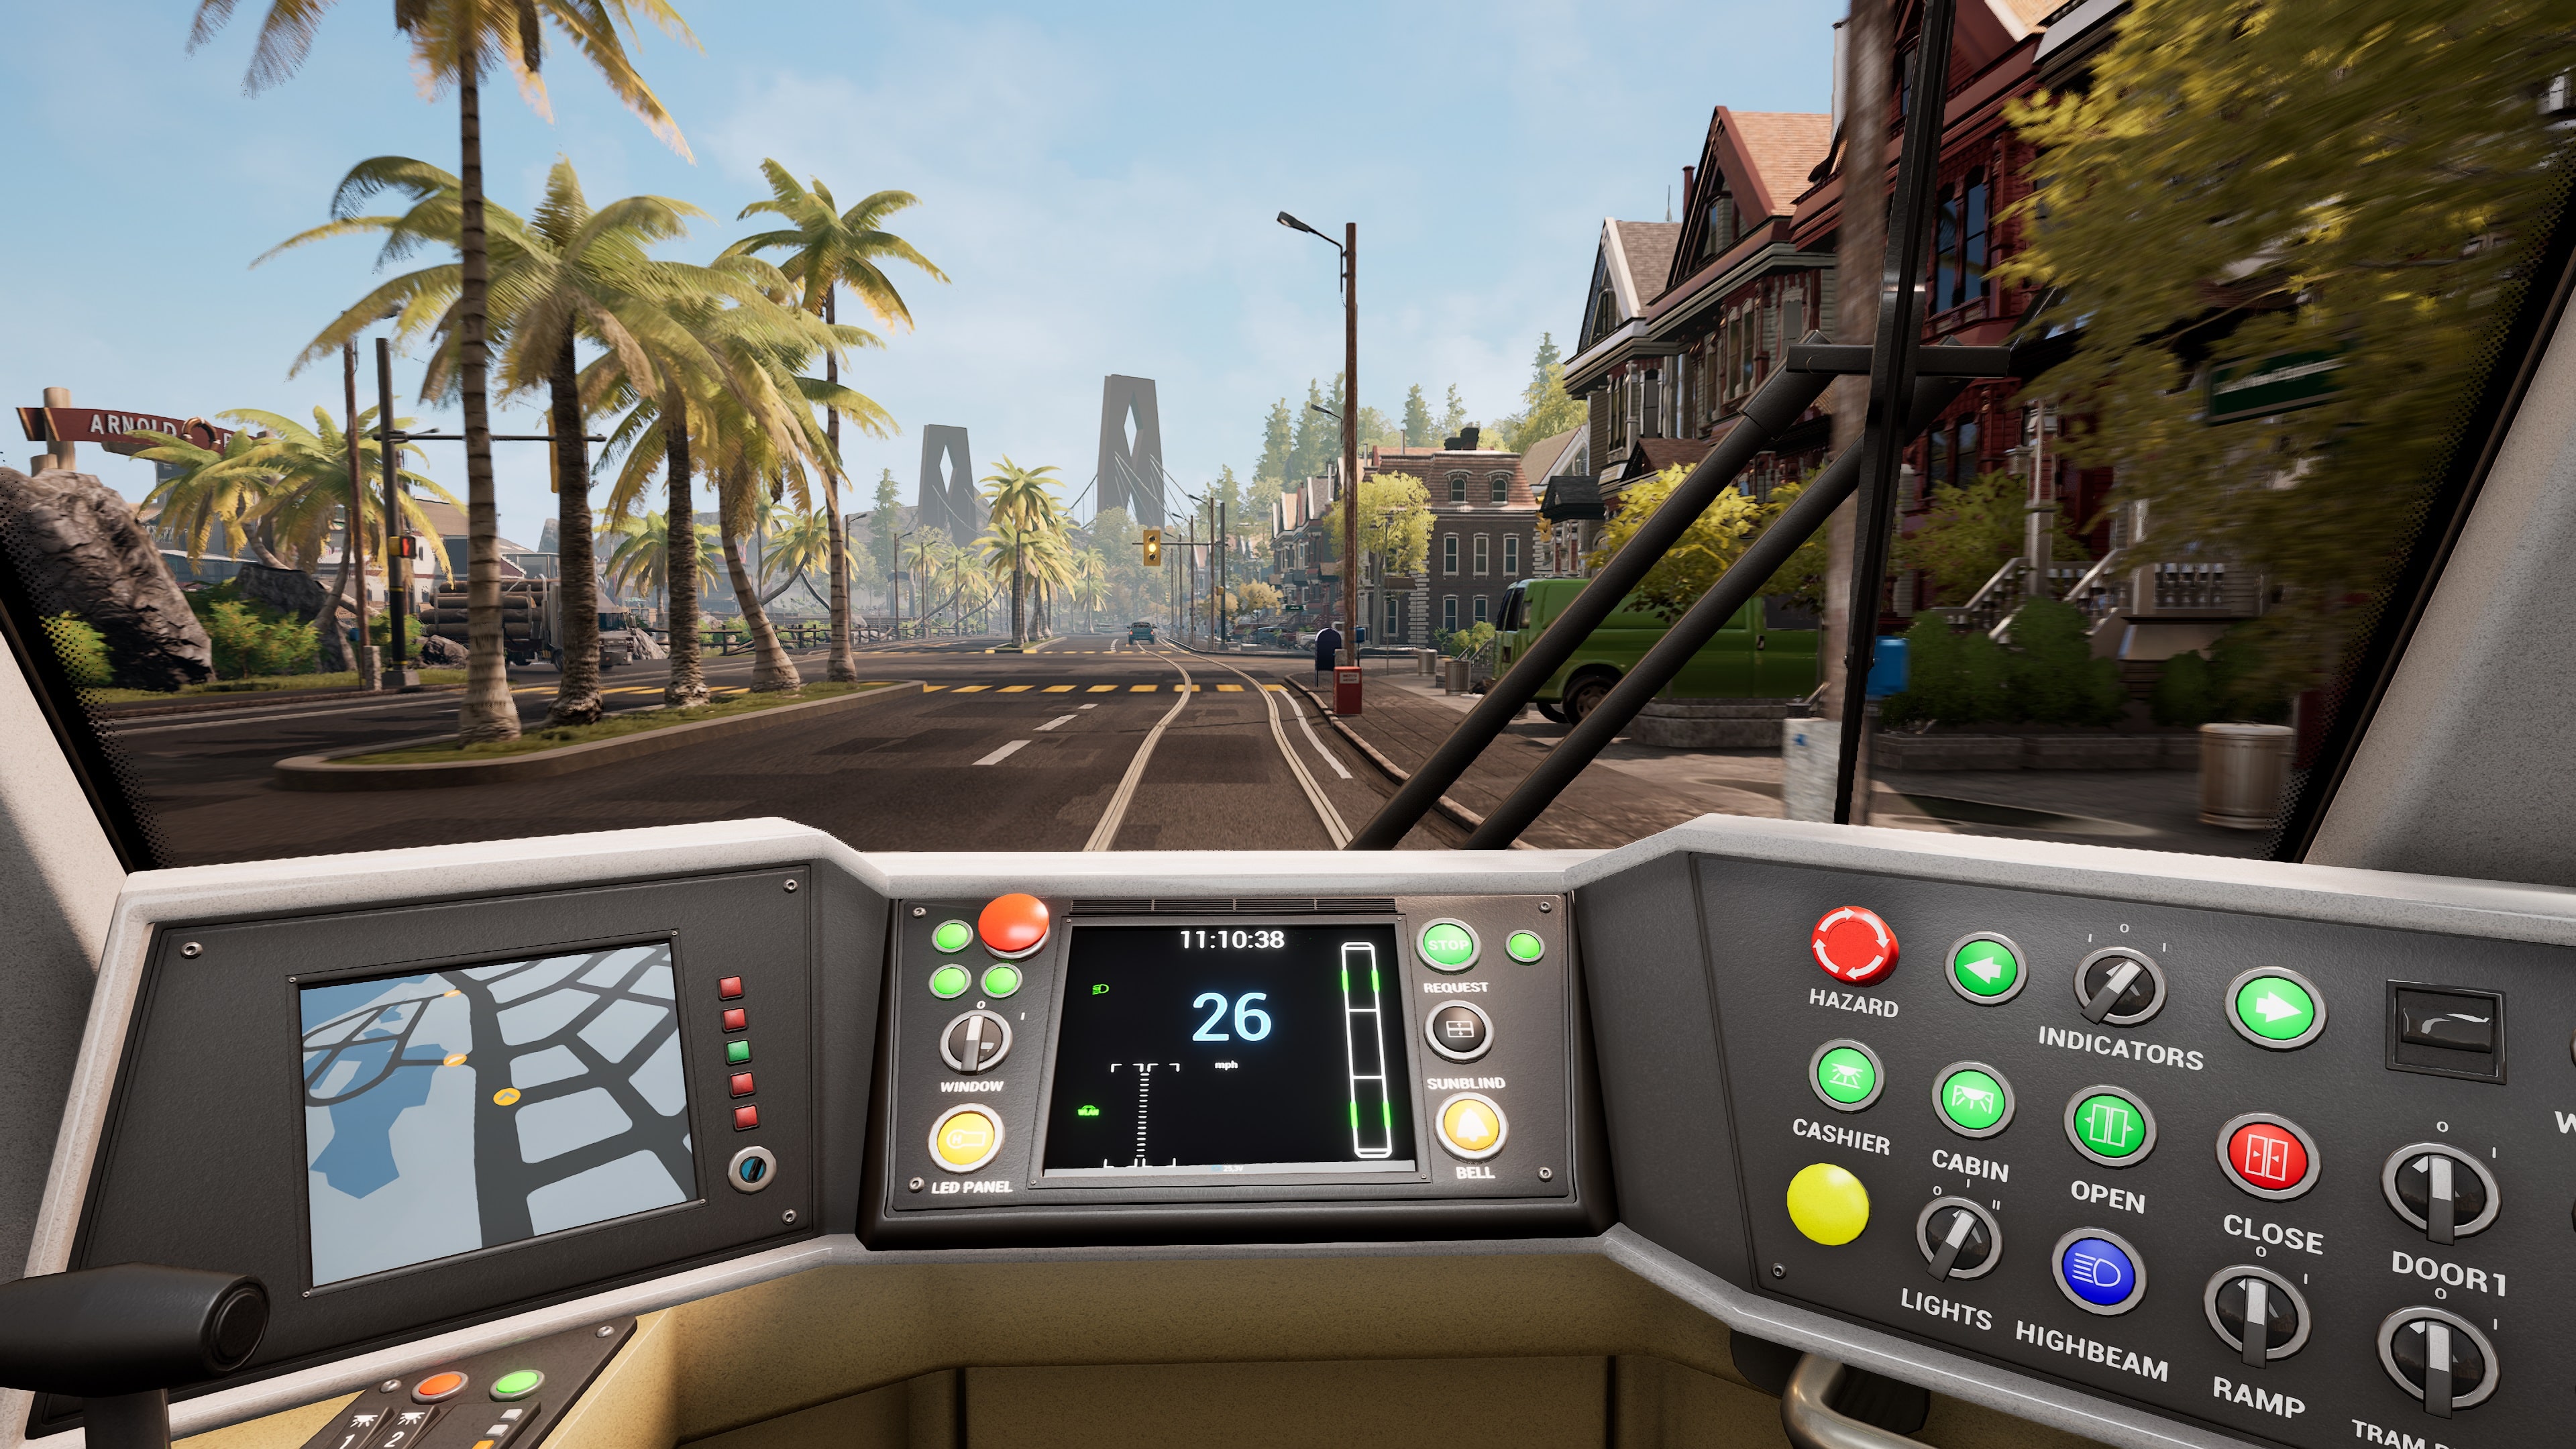 Bus Simulator on X: Bus Simulator 21 Next Stop joins the  𝐏𝐥𝐚𝐲𝐒𝐭𝐚𝐭𝐢𝐨𝐧 𝐏𝐥𝐮𝐬 𝐆𝐚𝐦𝐞 𝐂𝐚𝐭𝐚𝐥𝐨𝐠 on May 16! 🥳 For  subscribers of PS Plus Premium & Extra, the game will be available